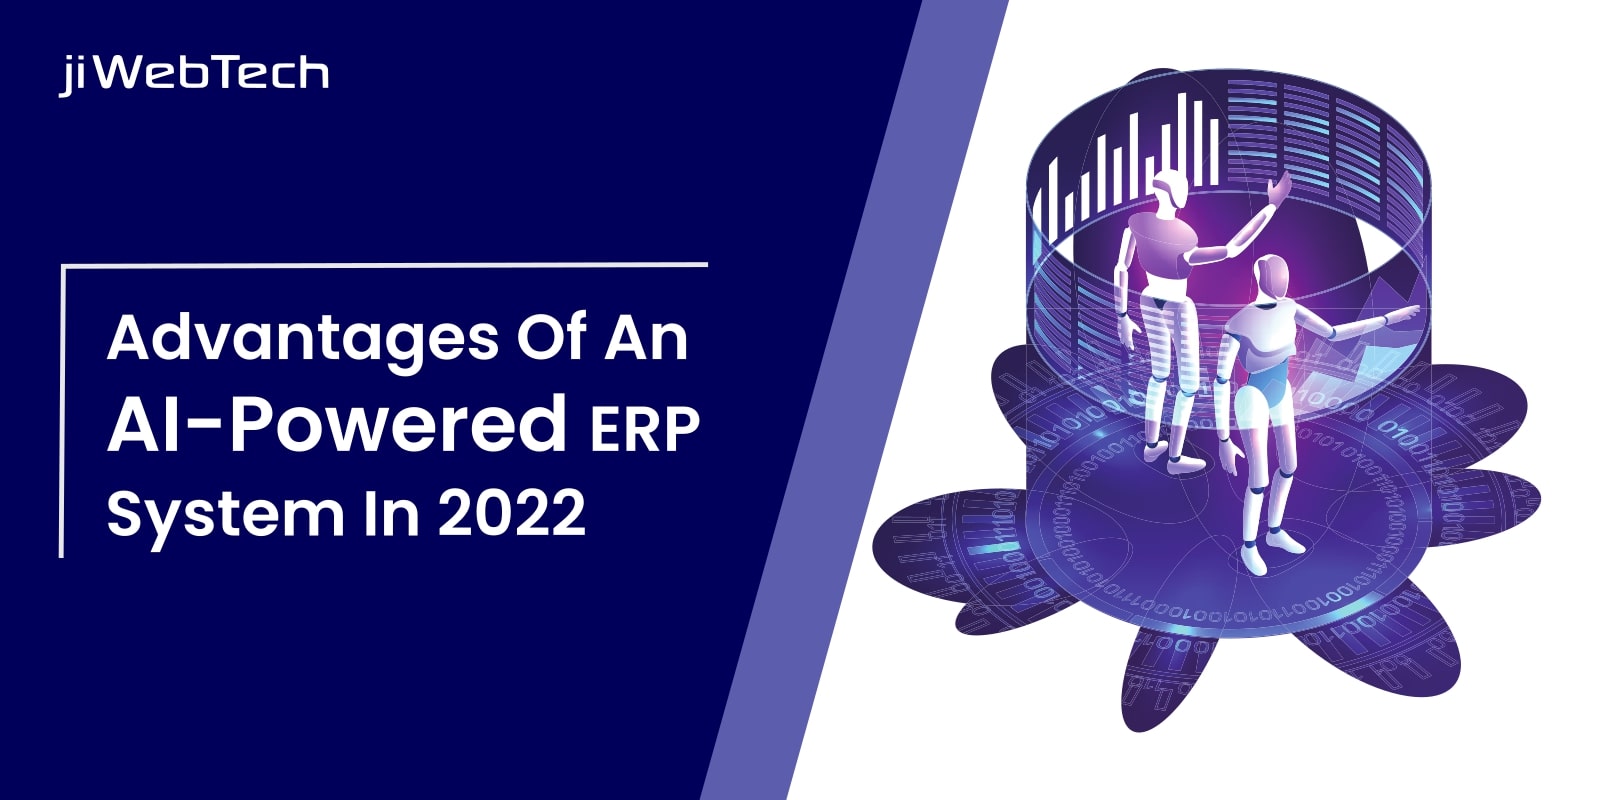 What Are The Advantages Of An AI-Powered ERP System In 2022?